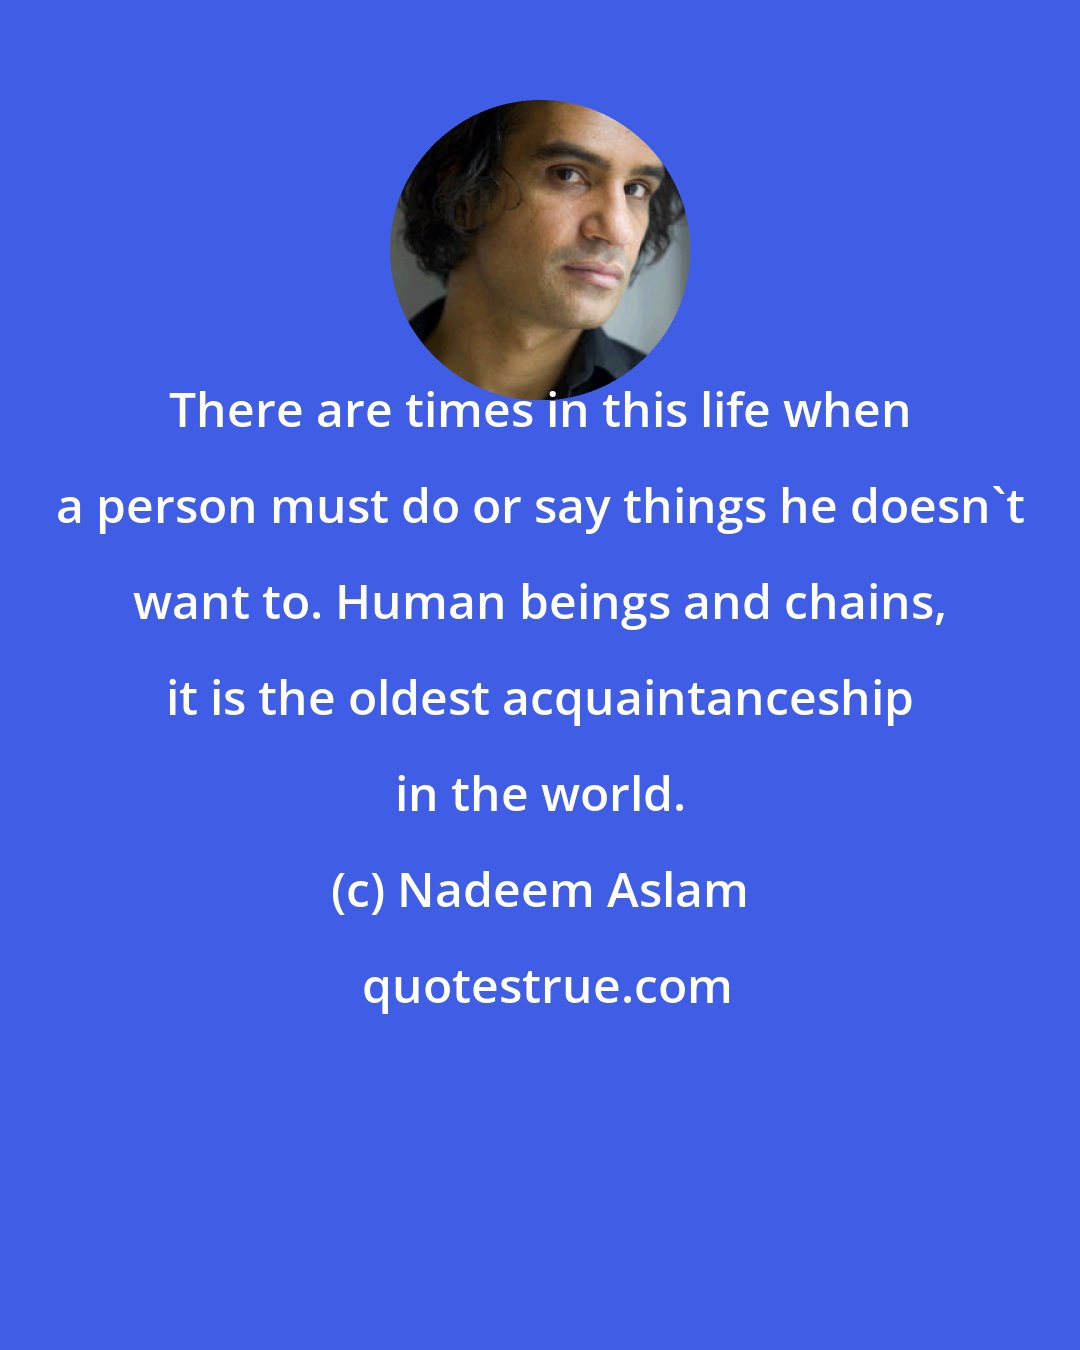 Nadeem Aslam: There are times in this life when a person must do or say things he doesn't want to. Human beings and chains, it is the oldest acquaintanceship in the world.